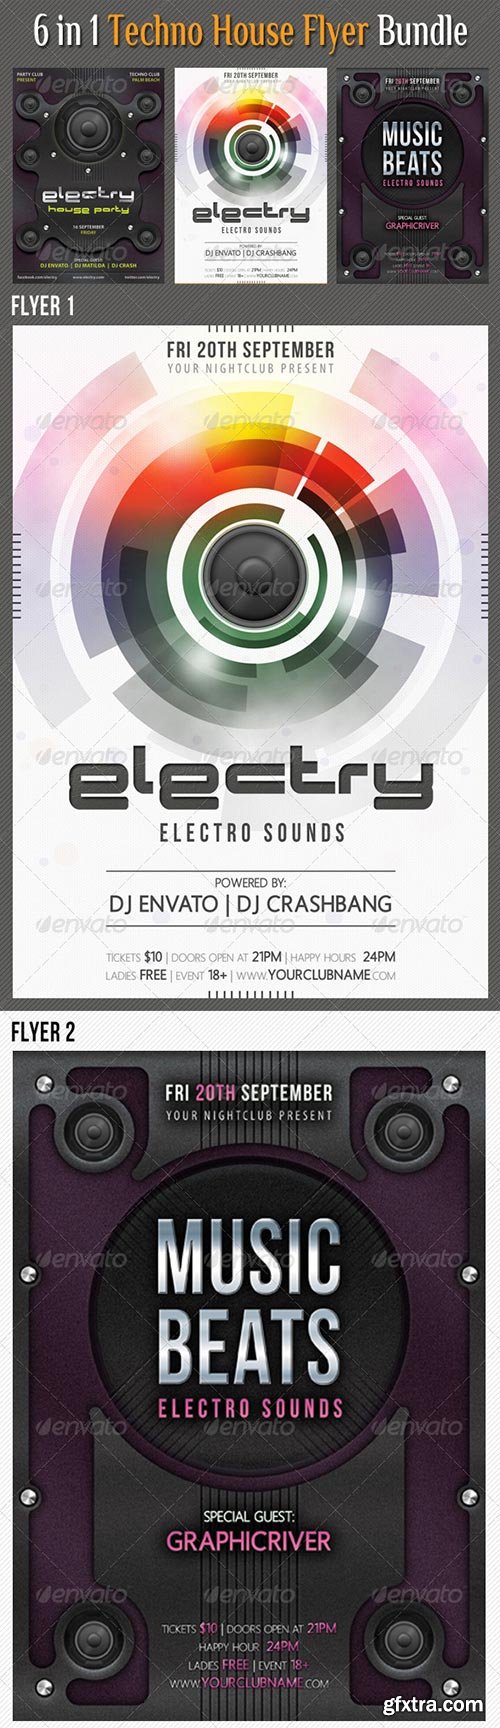 GraphicRiver - 3 in 1 Techno House Flyer Bundle 01